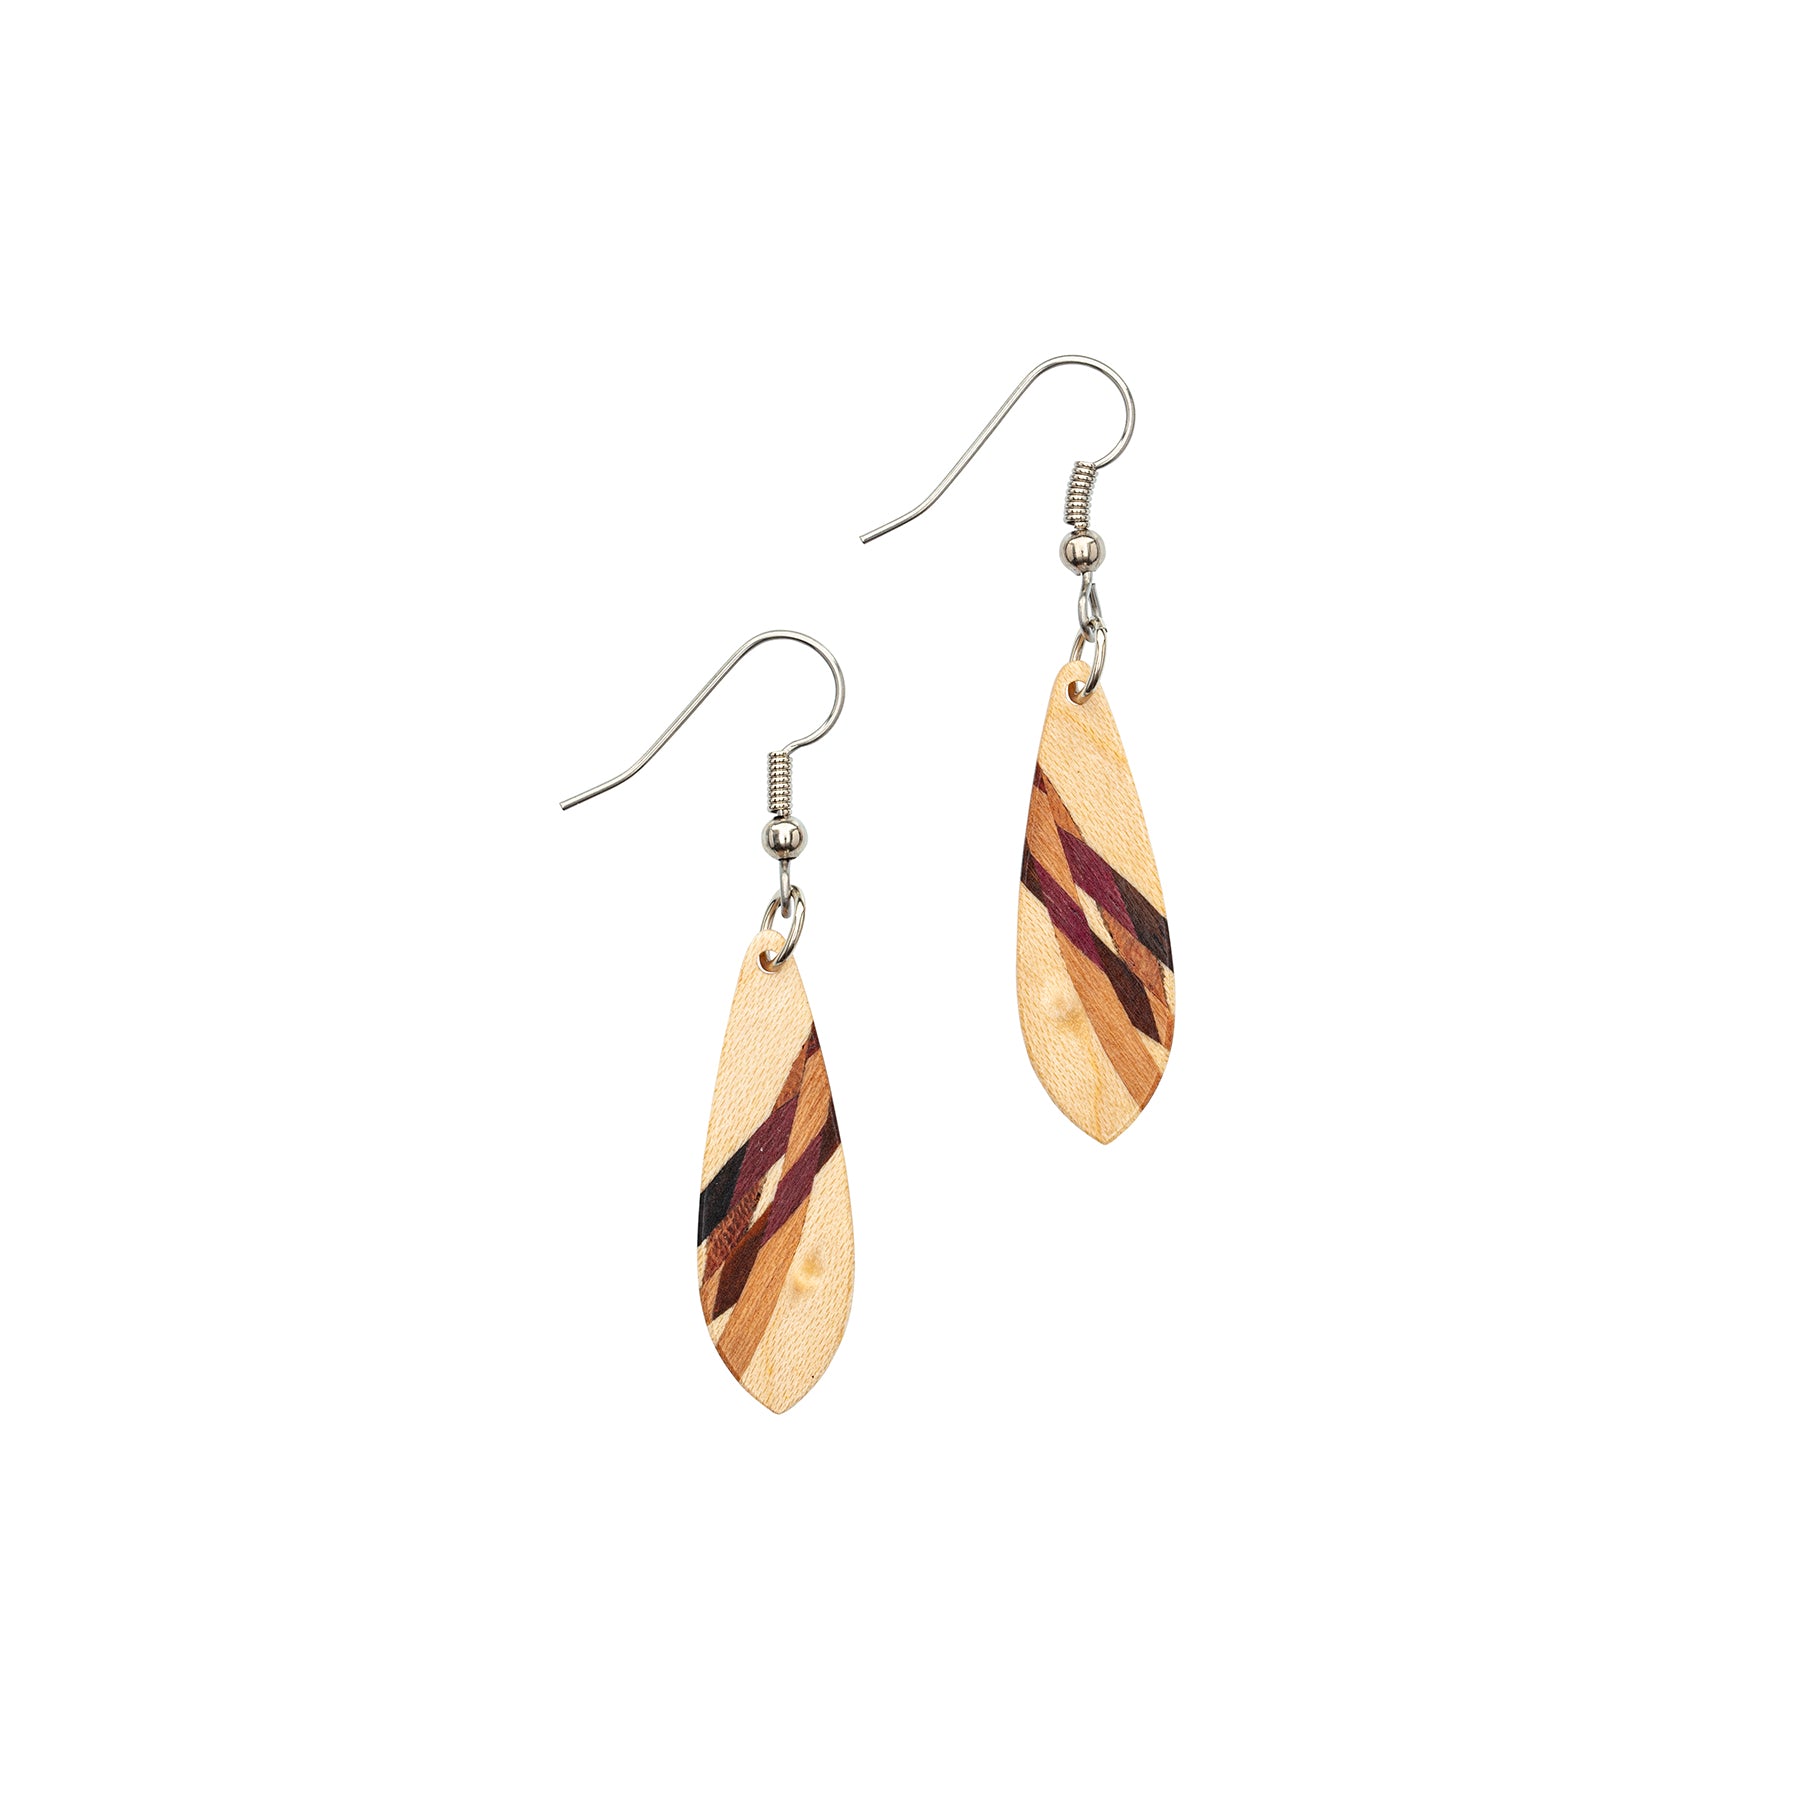 Inlay earrings marquis small